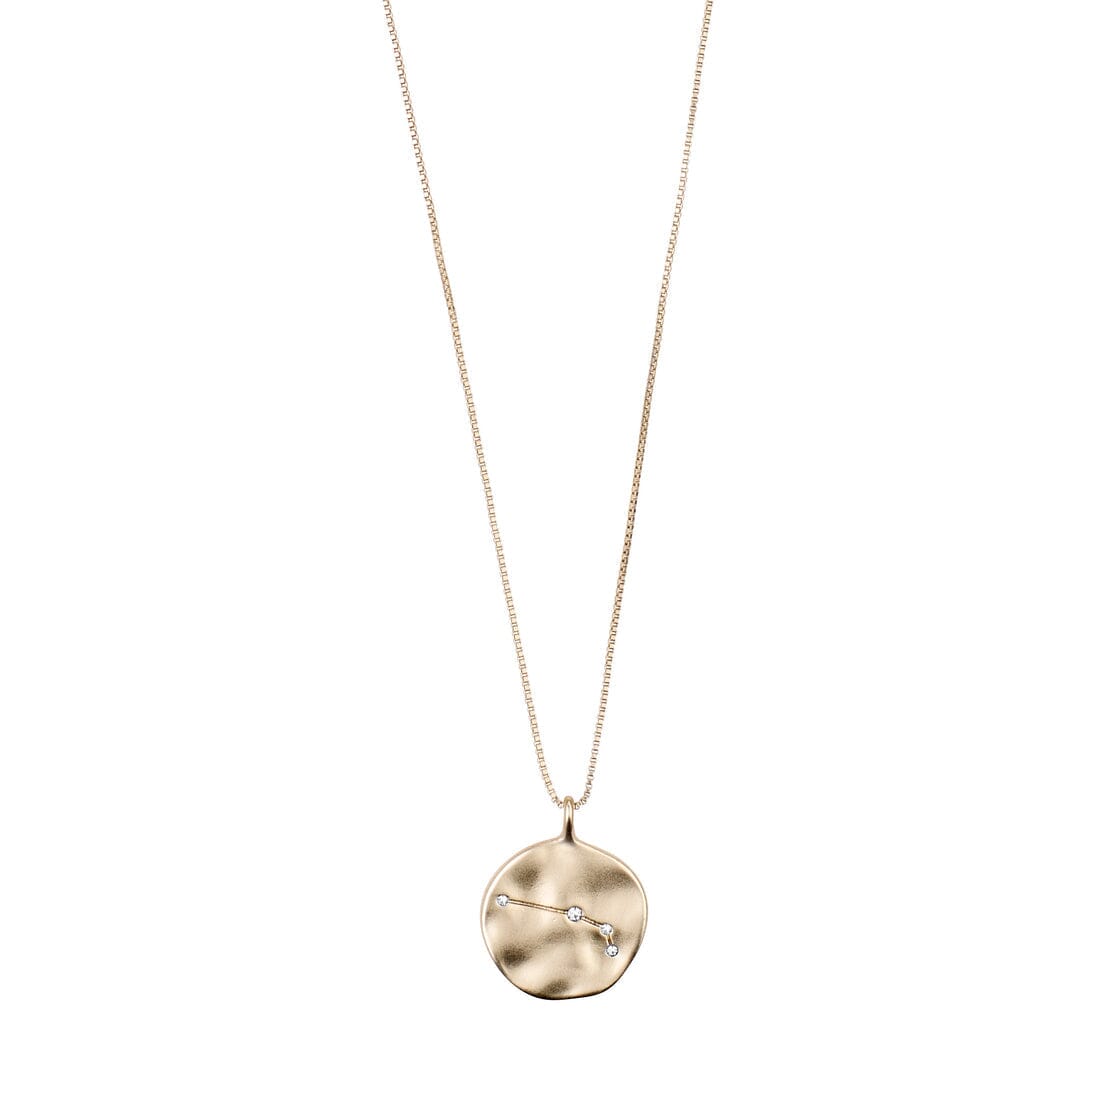 ARIES. The first sign of the zodiac. This necklace takes you on a journey all the way up to the stars with its stunning double-sided pendant that has a velvety, satin finish.